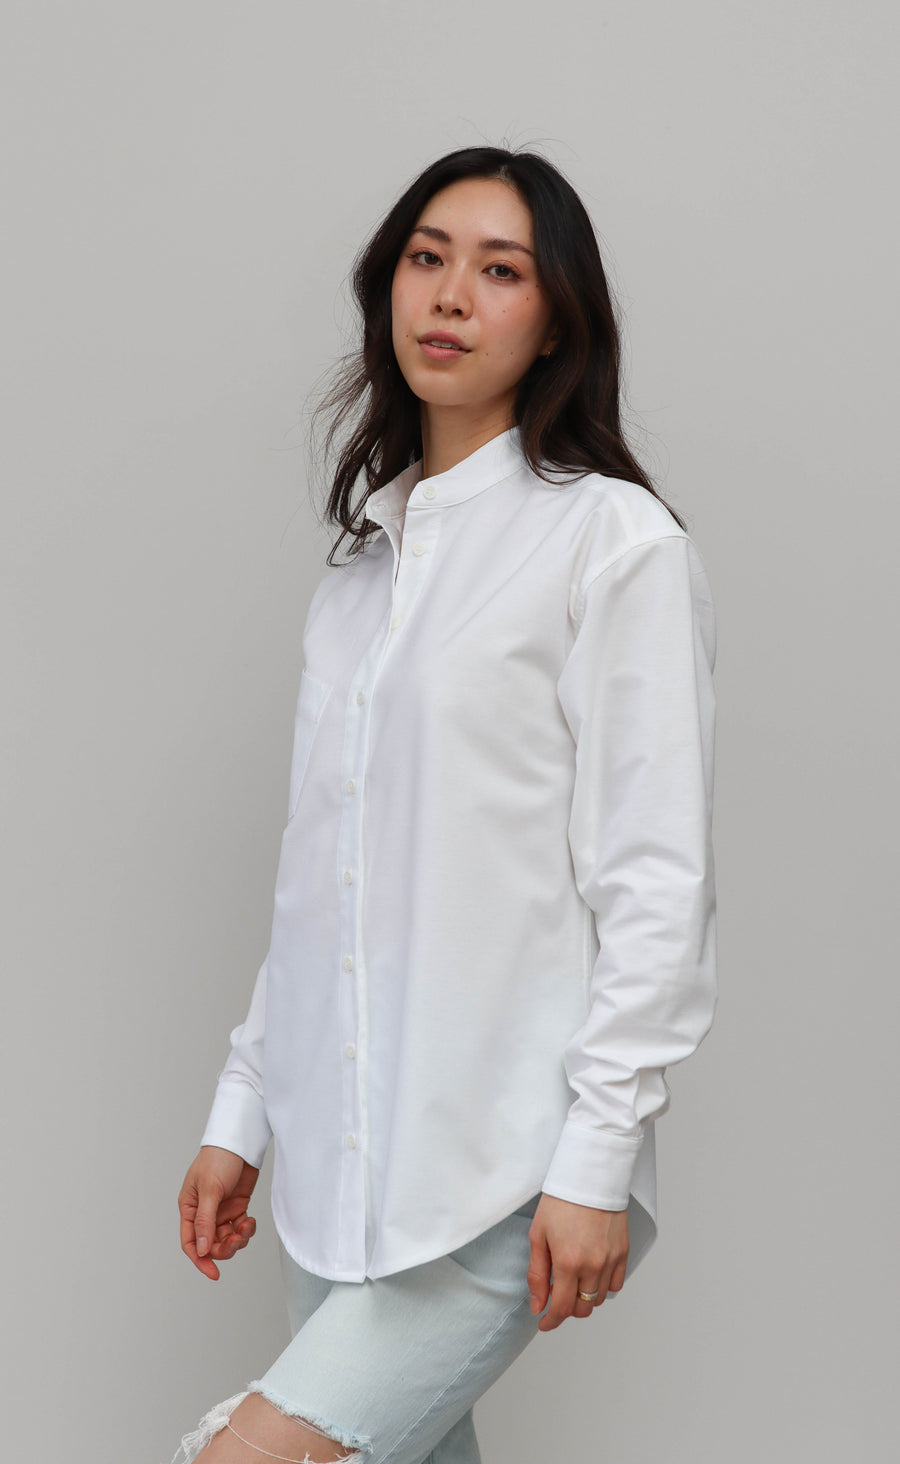 The Tailor - Wayward Fit Tunic - White Cotton Oxford